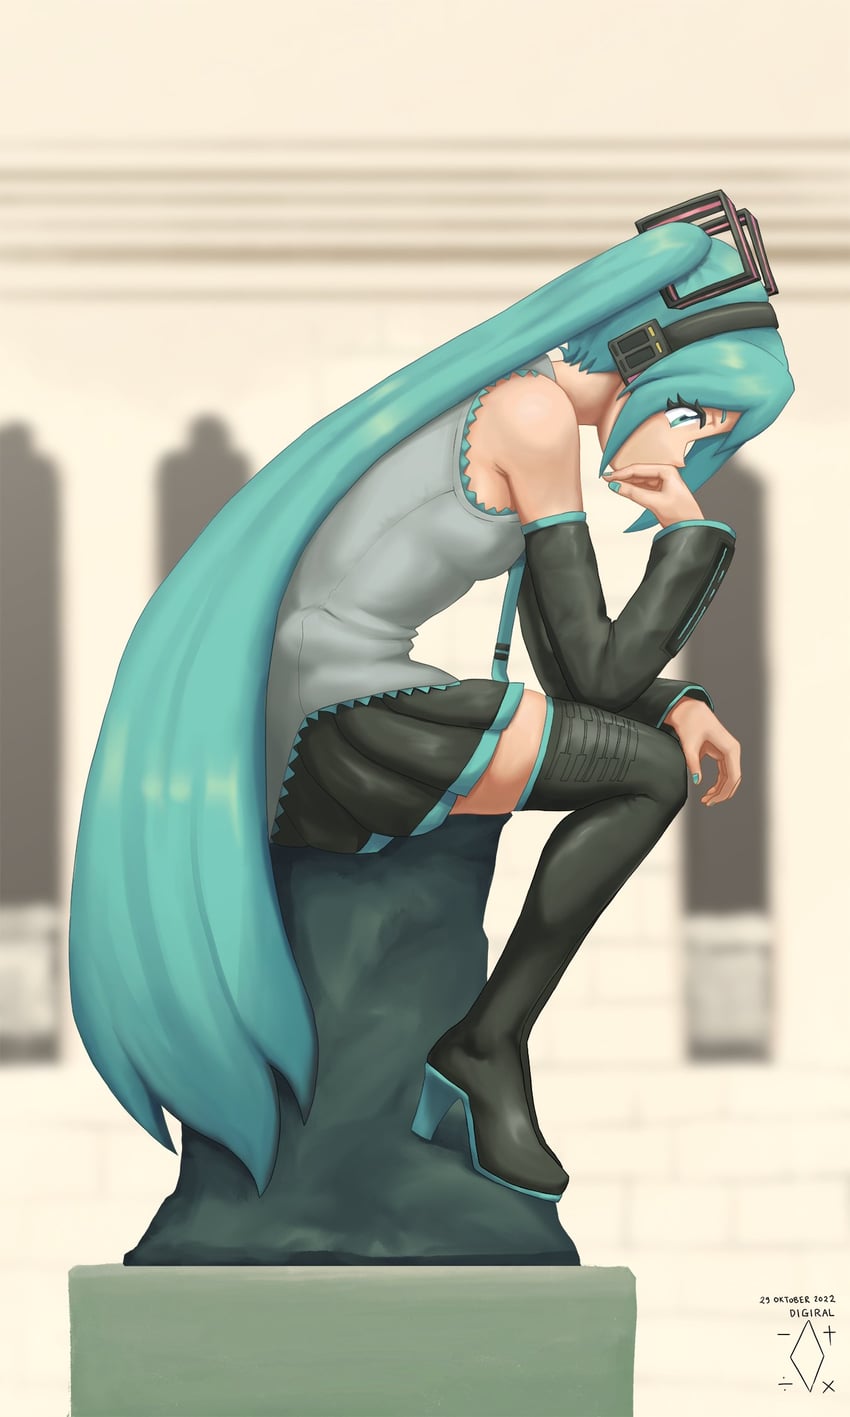 hatsune miku (vocaloid and 1 more) drawn by digiral